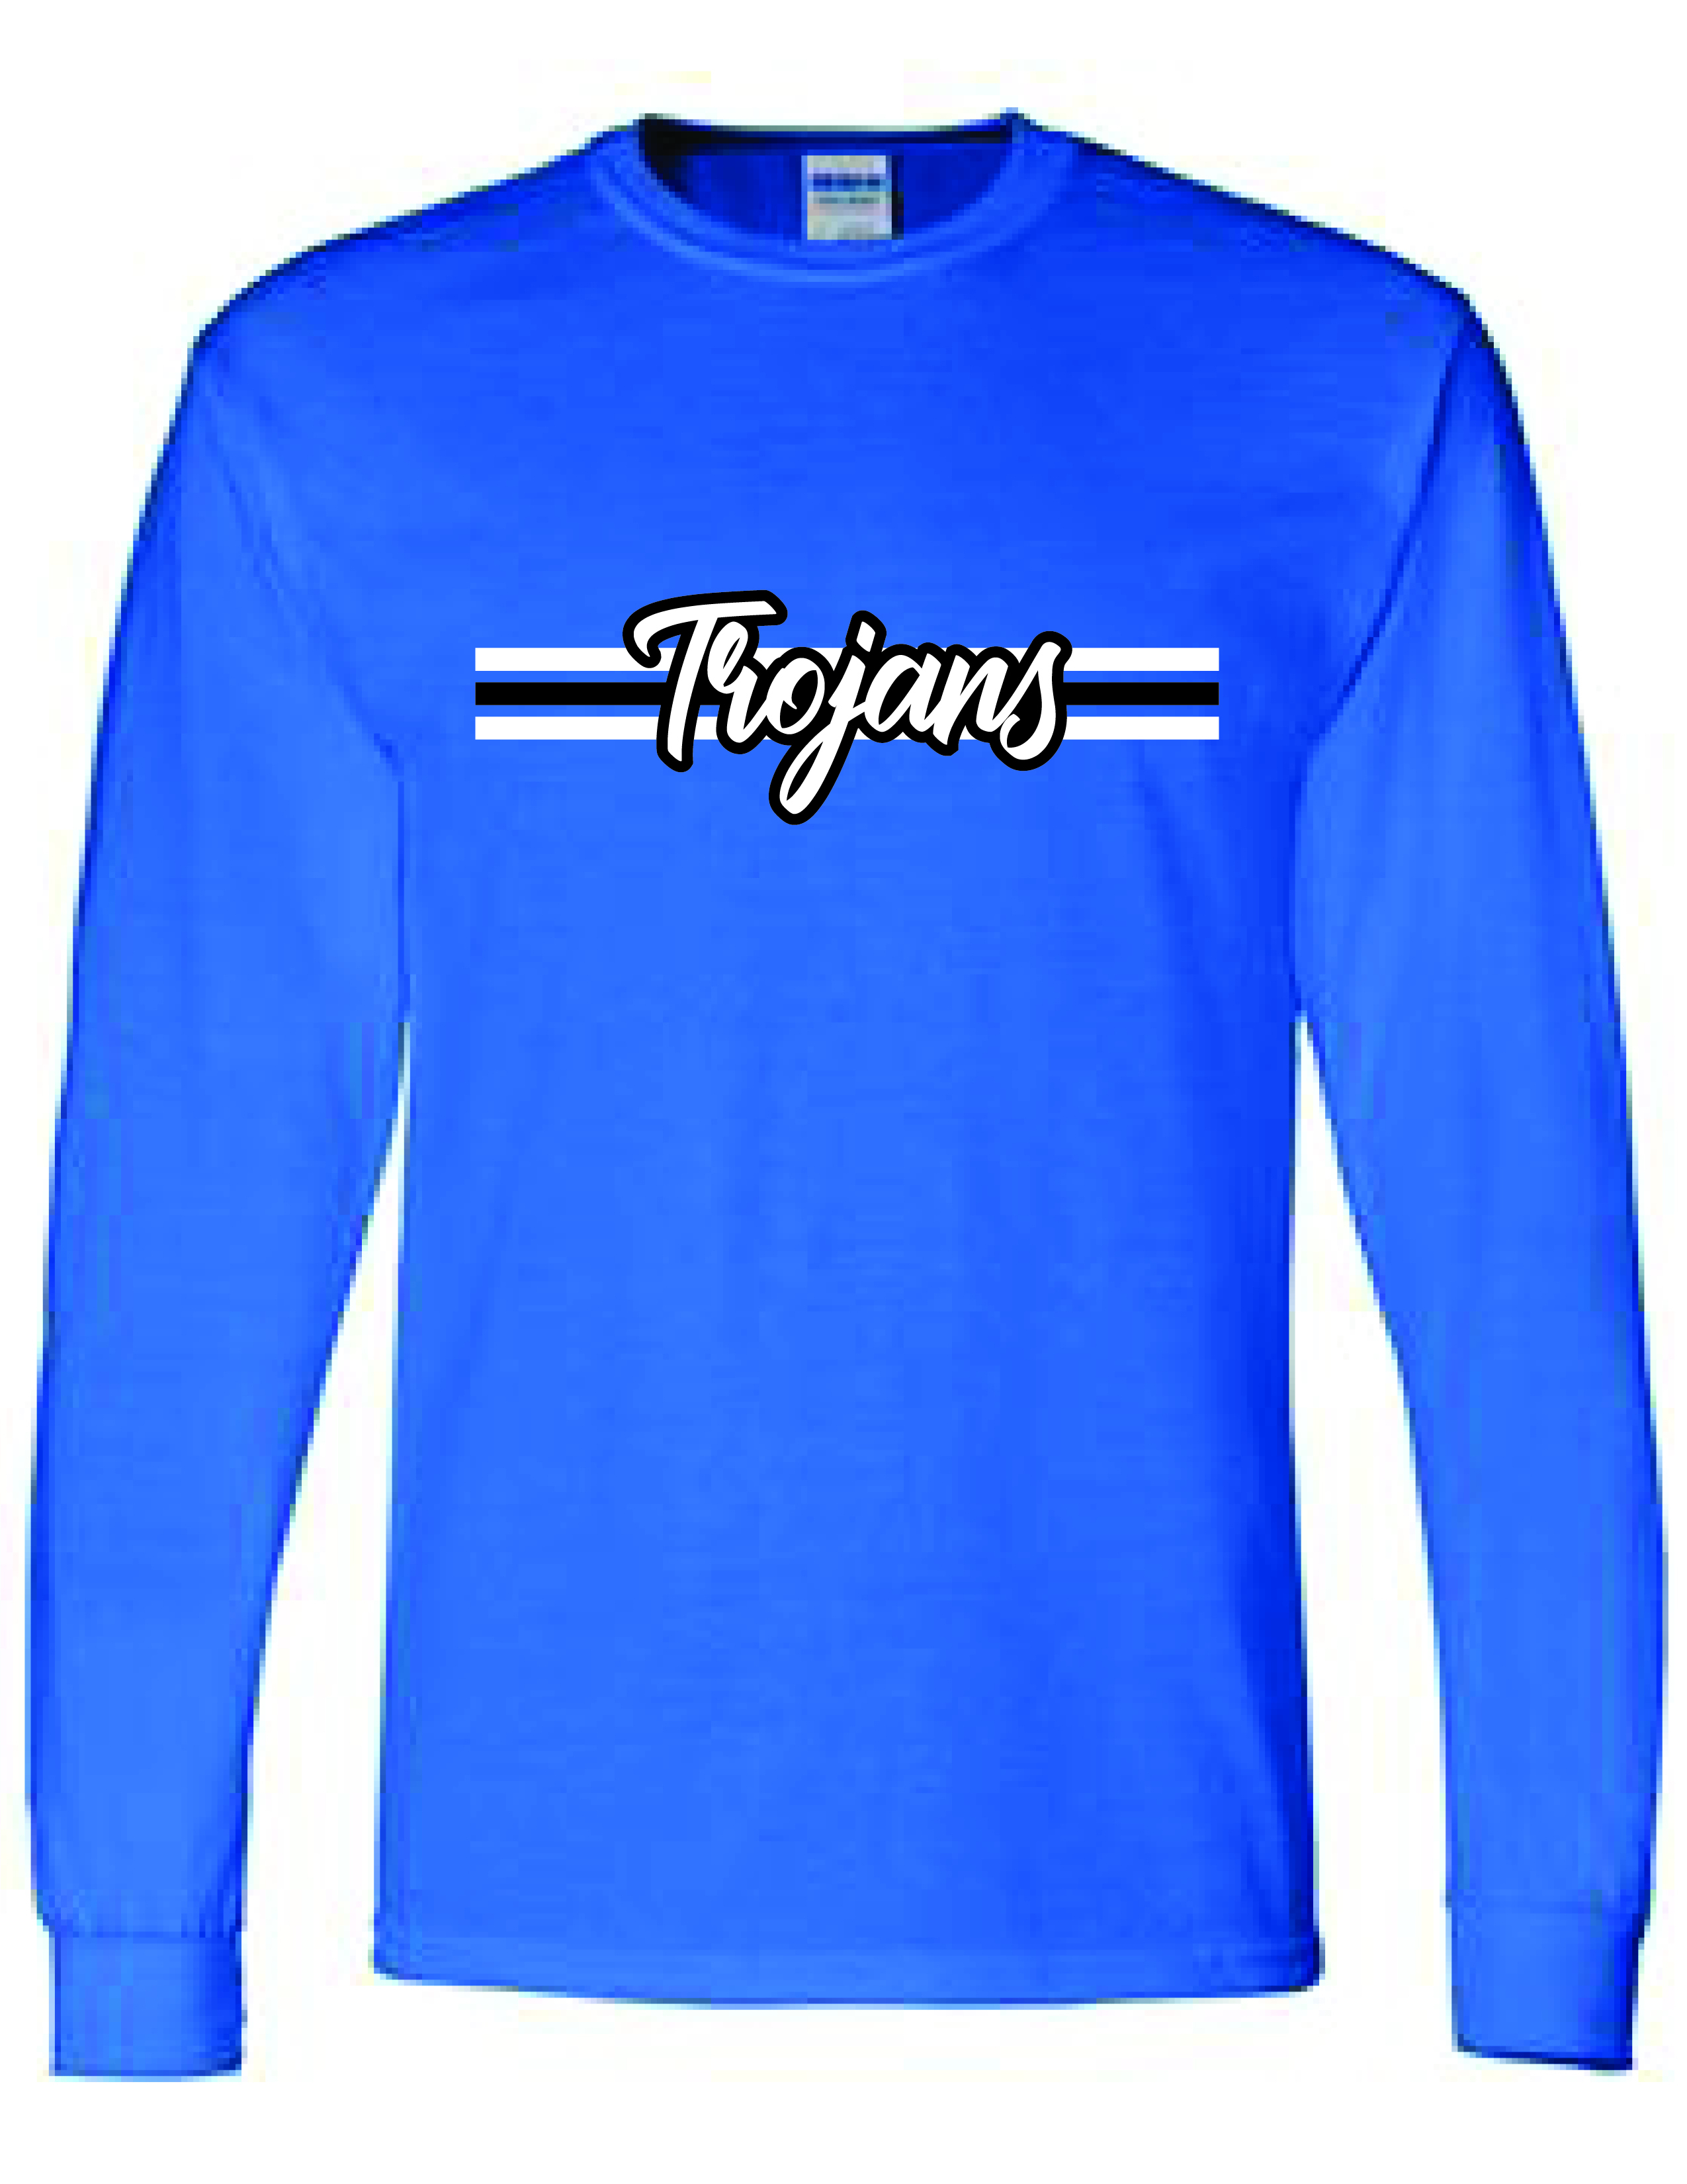 TROJAN SHORT LONG SLEEVE (Mens' and Youth sizes)